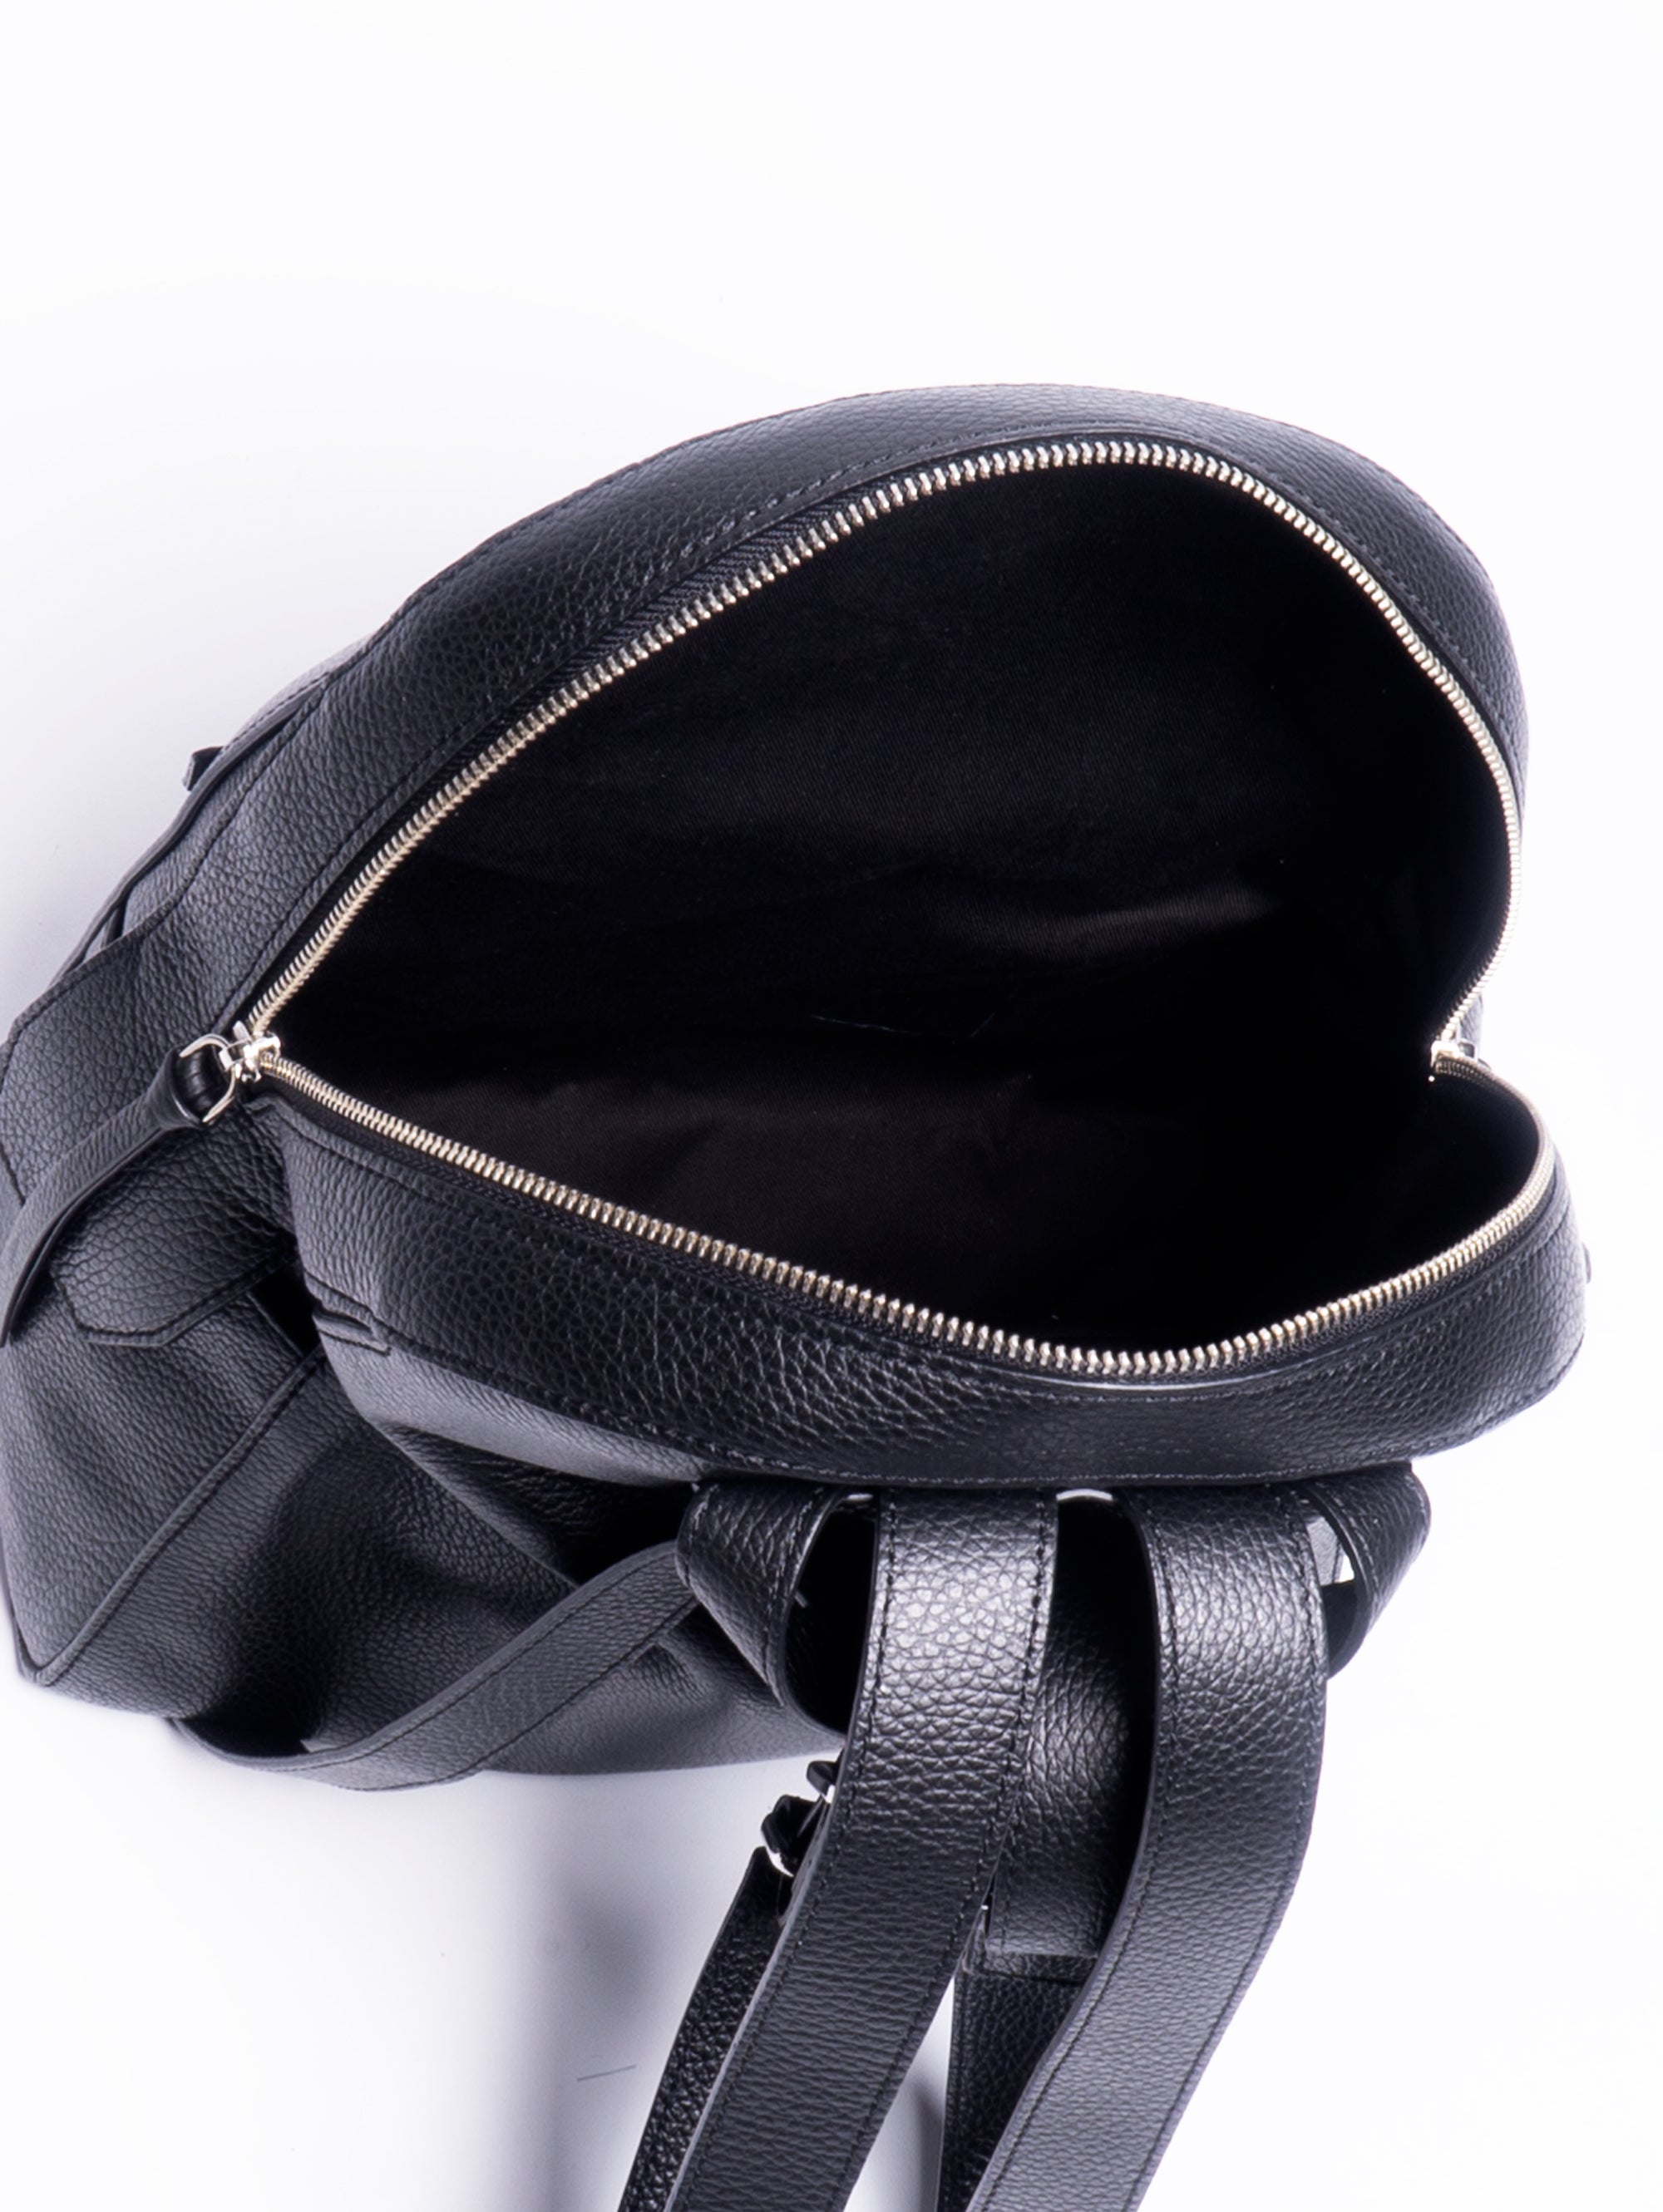 Posh Backpack in Black Grained Leather